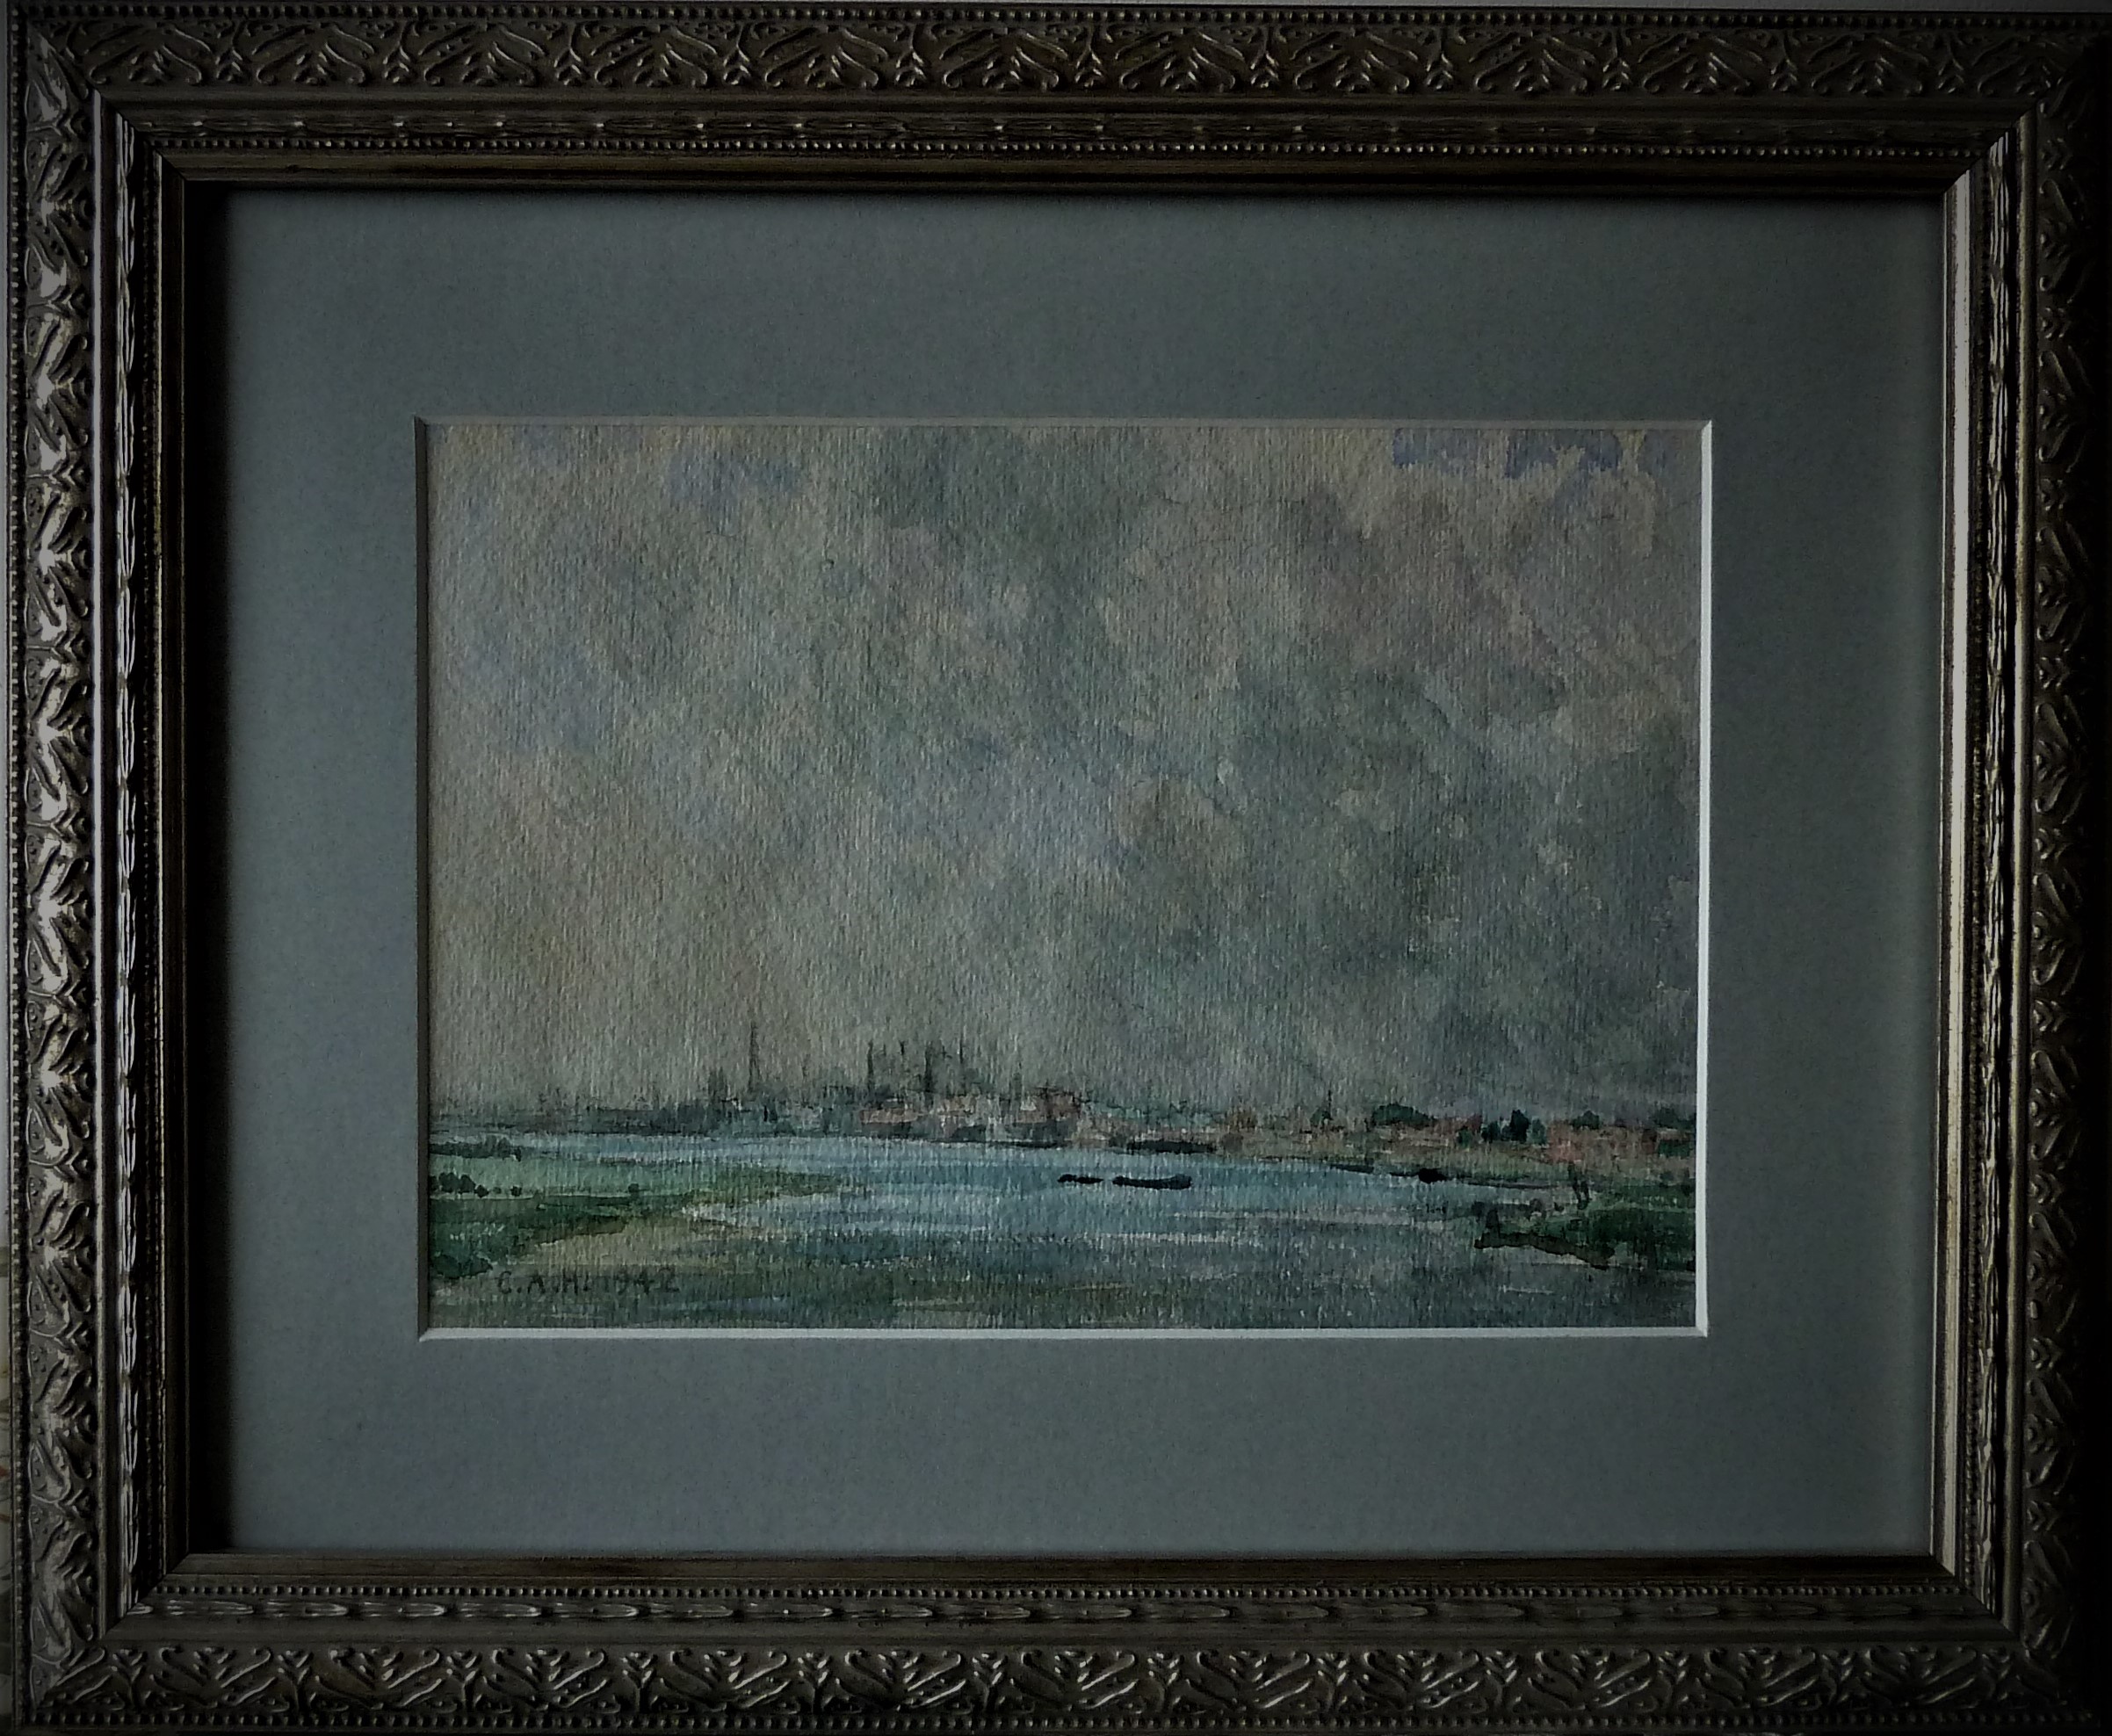 Charles Arthur Hannaford (1887 - 1972)  
Member of the Royal Society of British Artists.Watercolour of Kings Lynn by Charles Arthur Hannaford R.B.A. (1887-1972) framed with art glass UV
Charles A Hannaford founded Broads Tours in Norfolk and exhibited and sold from the Broads Tours tearooms. 
Charles A Hannaford was educated at Devonport High School and studied art at Plymouth Art School.
 He settled in Wroxham,Norfolk.  Many of his painting were illustrated in the small booklet he produced entitled â€œThe Charm of the Norfolk Broadsâ€. 
His work also achieved wider acclaim as he exhibited with the Royal Society of British Artists.
Charles A Hannaford painted right up to his death on 8th August 1972 age 85
